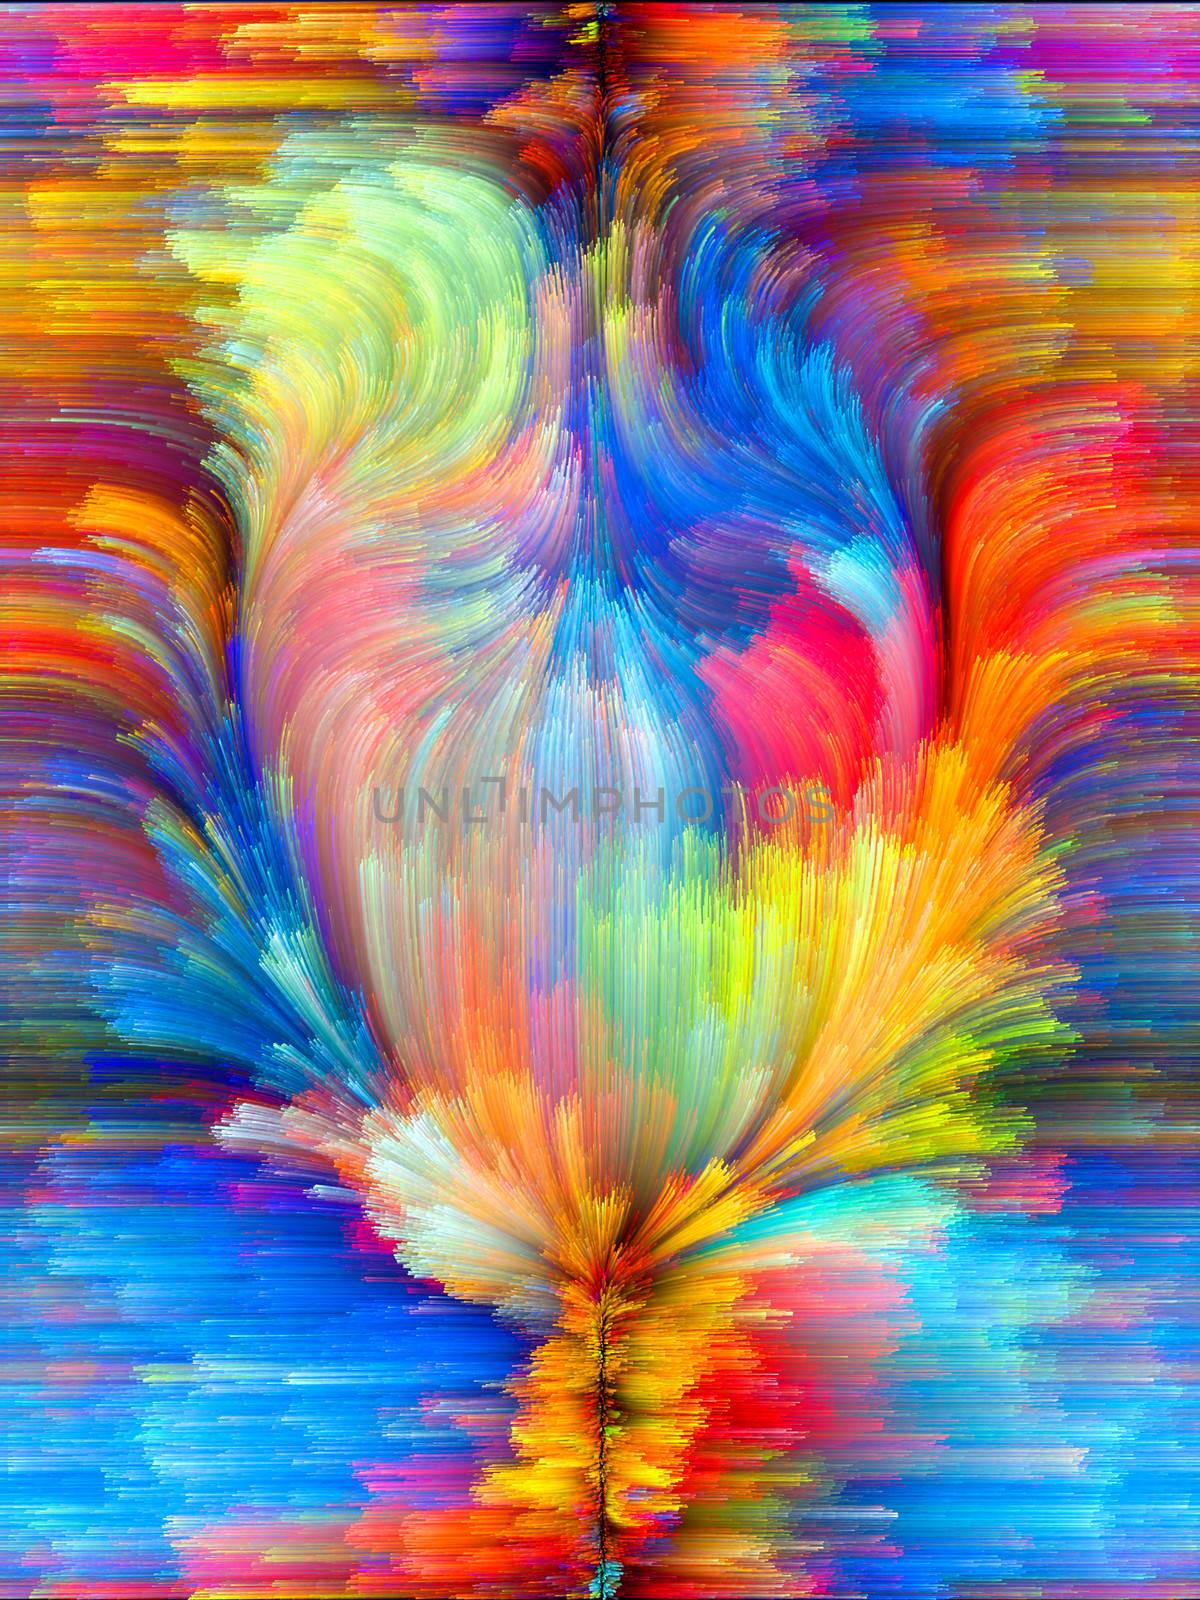 Colors In Bloom series. Interplay of fractal color textures on the subject of imagination, creativity and design